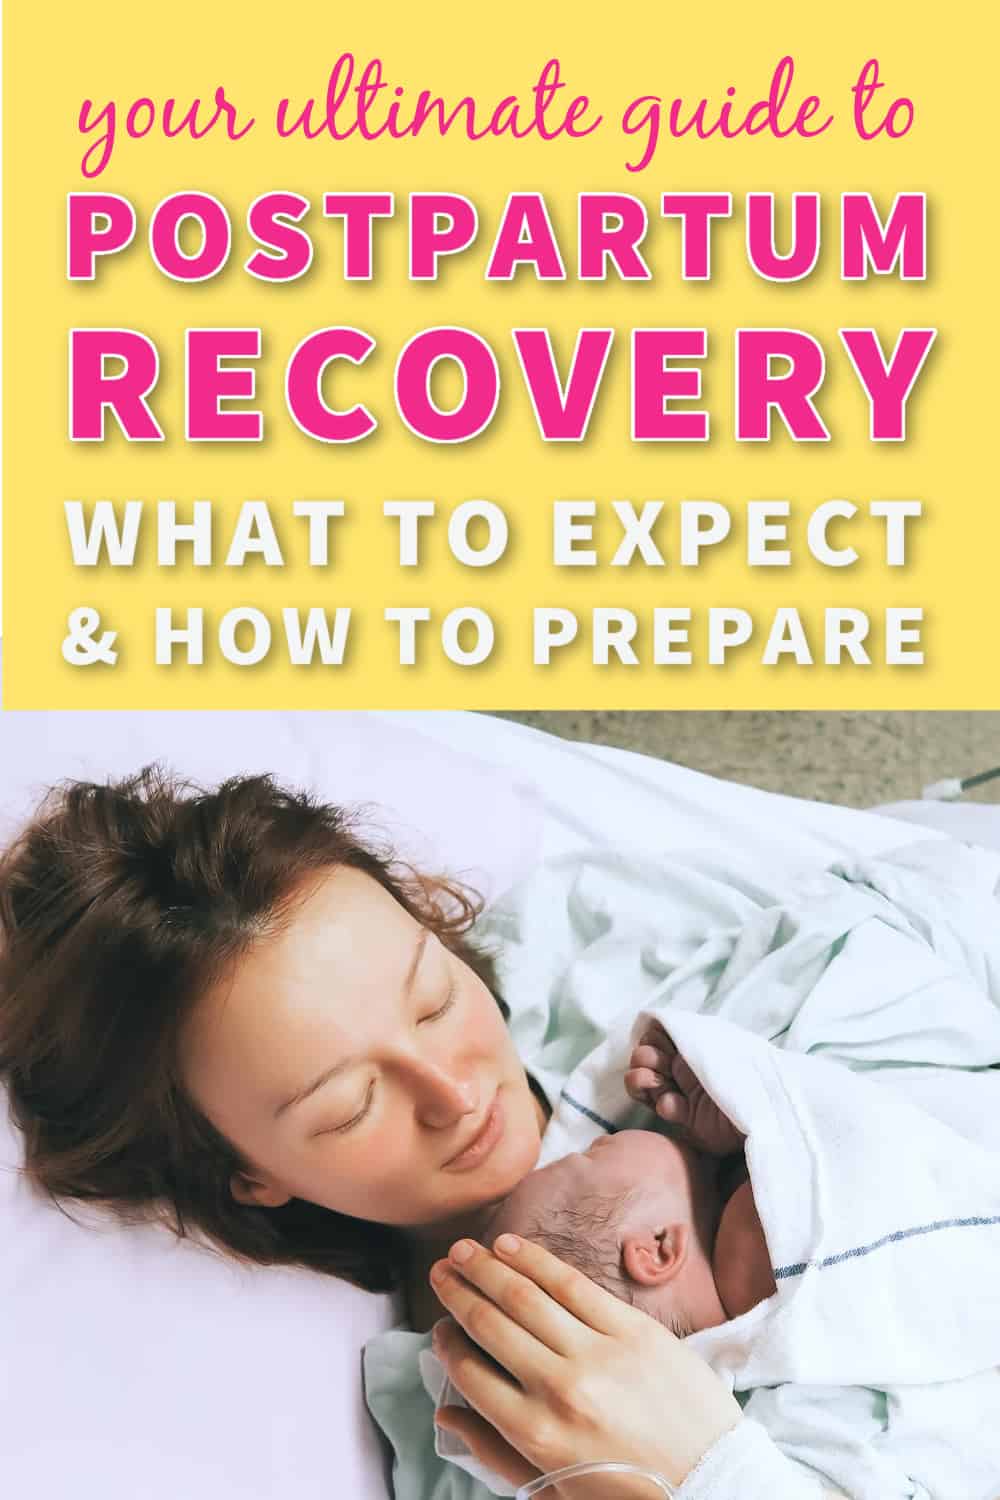 Postpartum recovery: tips to heal up your postpartum body quick (& feel human again)